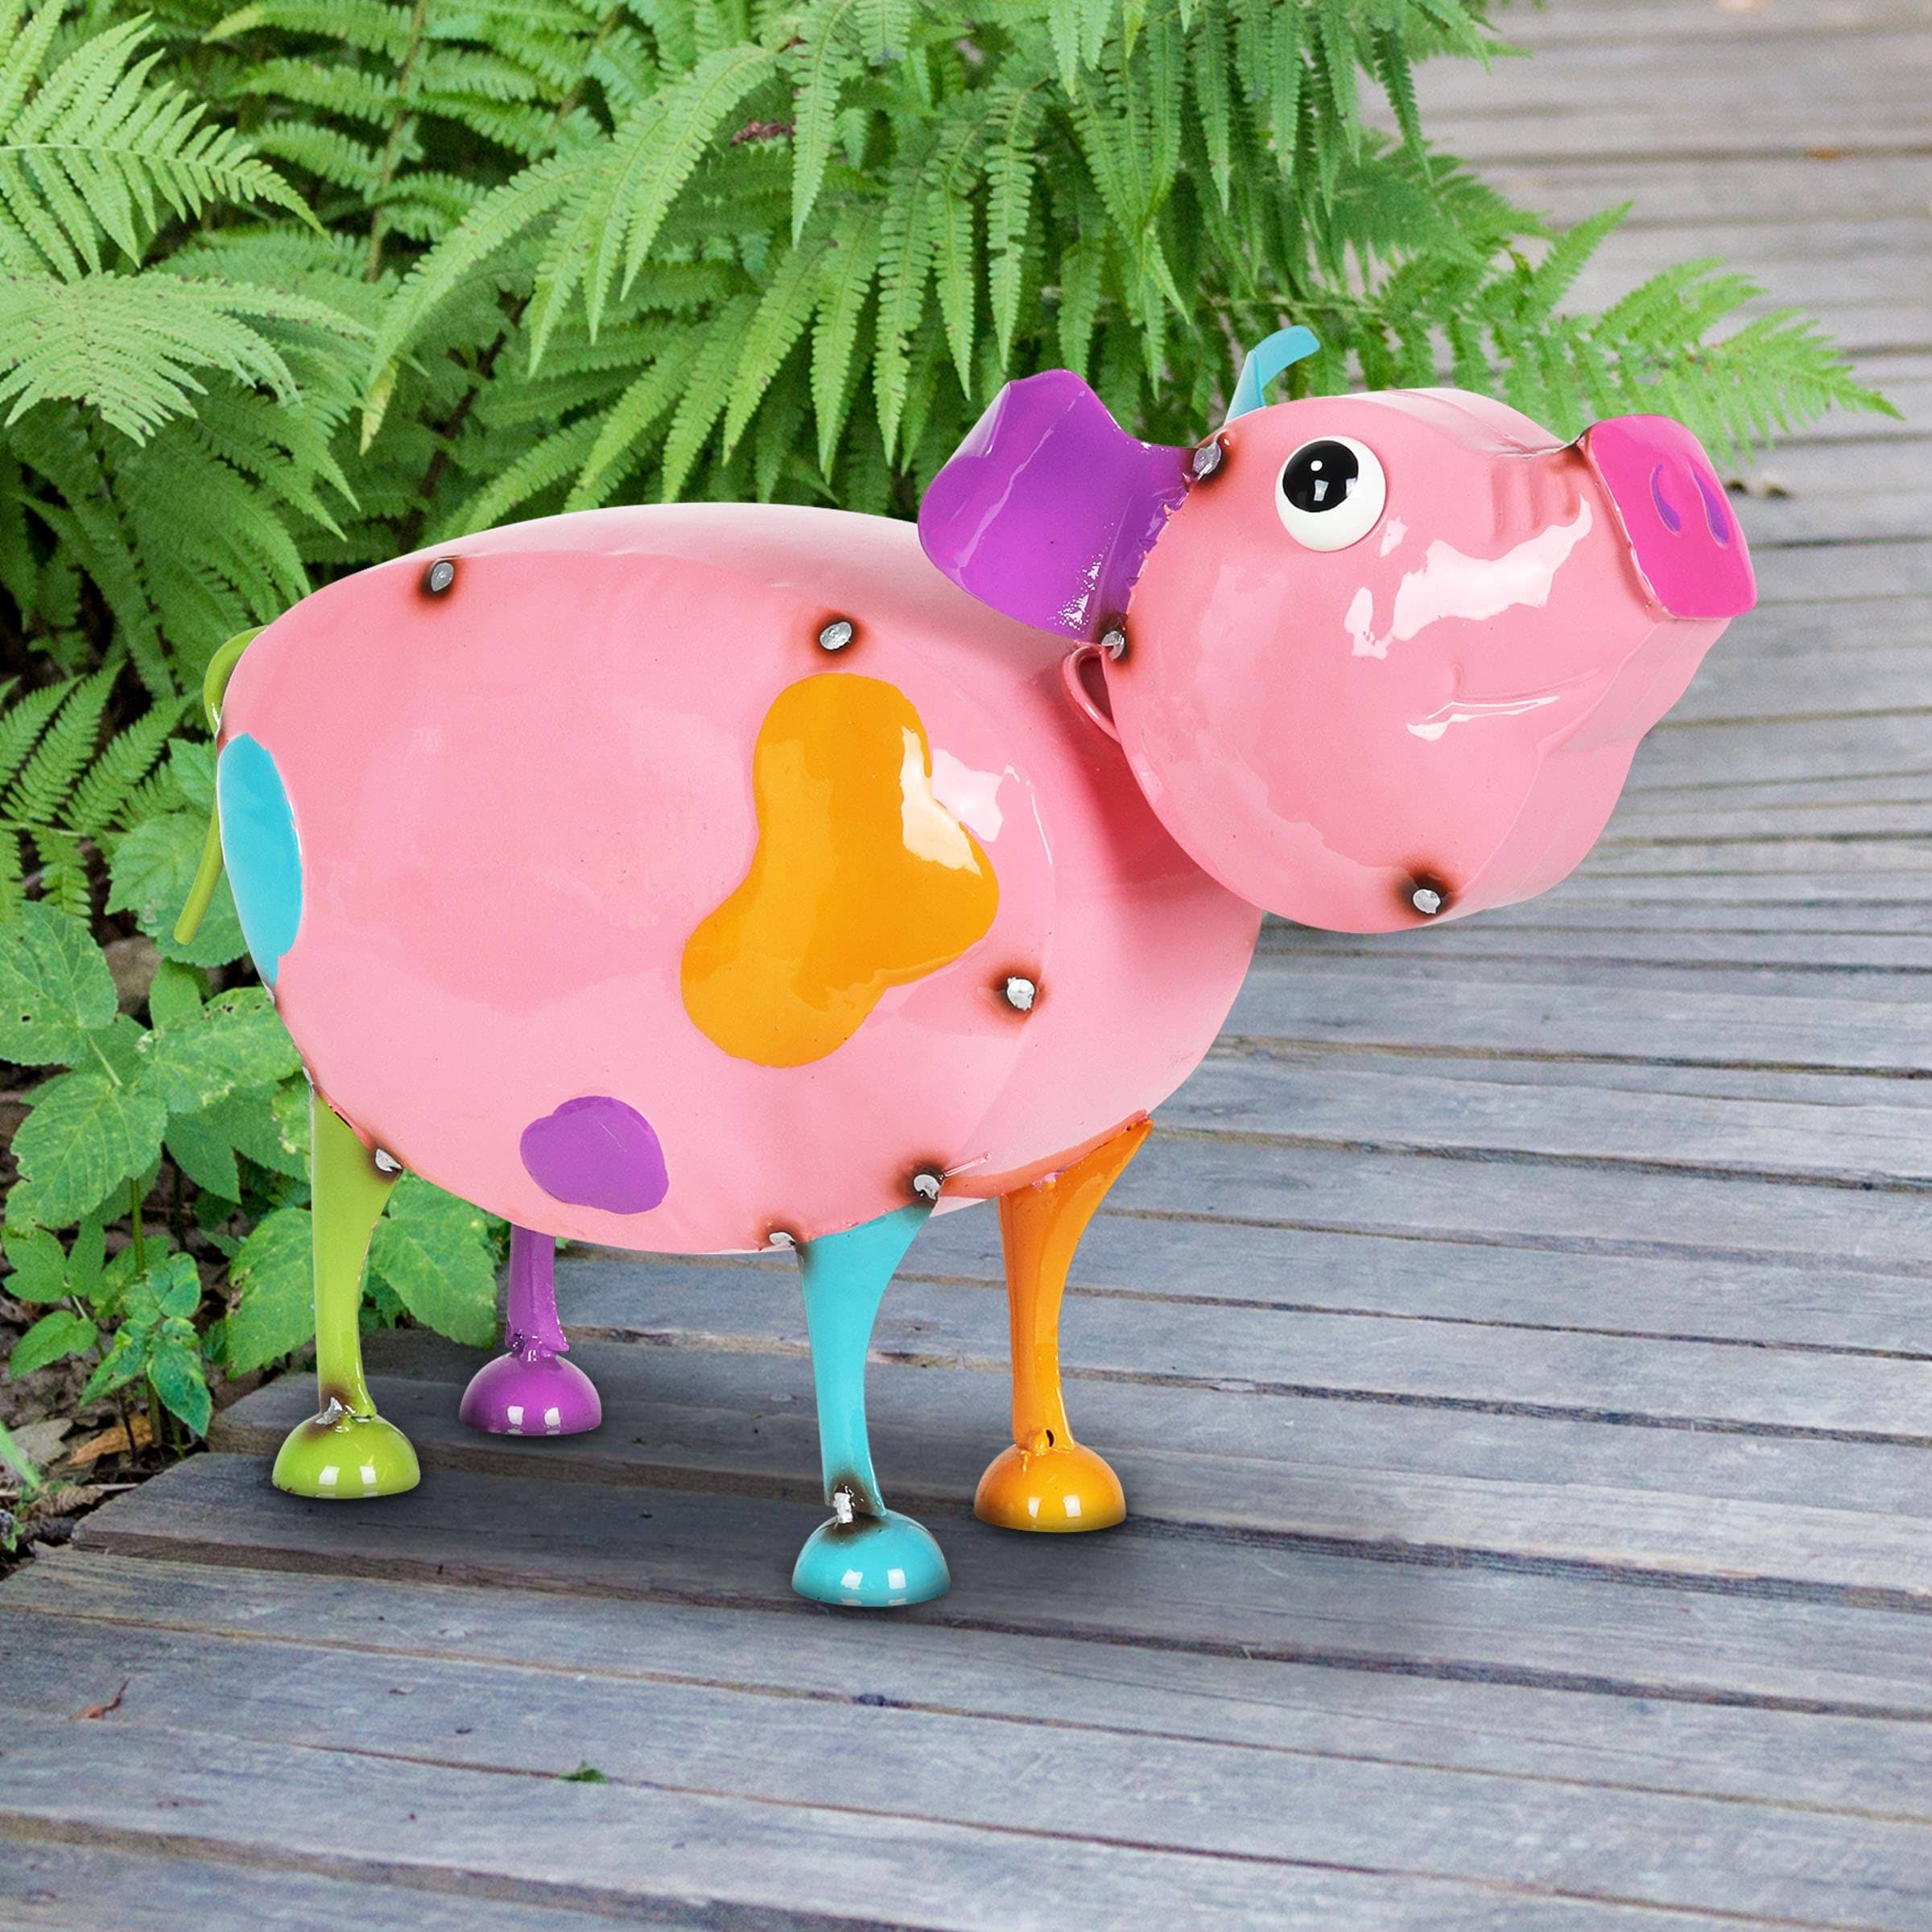 Exhart Hand Painted Pink Metal Pig Statuary, 15 by 9 Inches - Multi